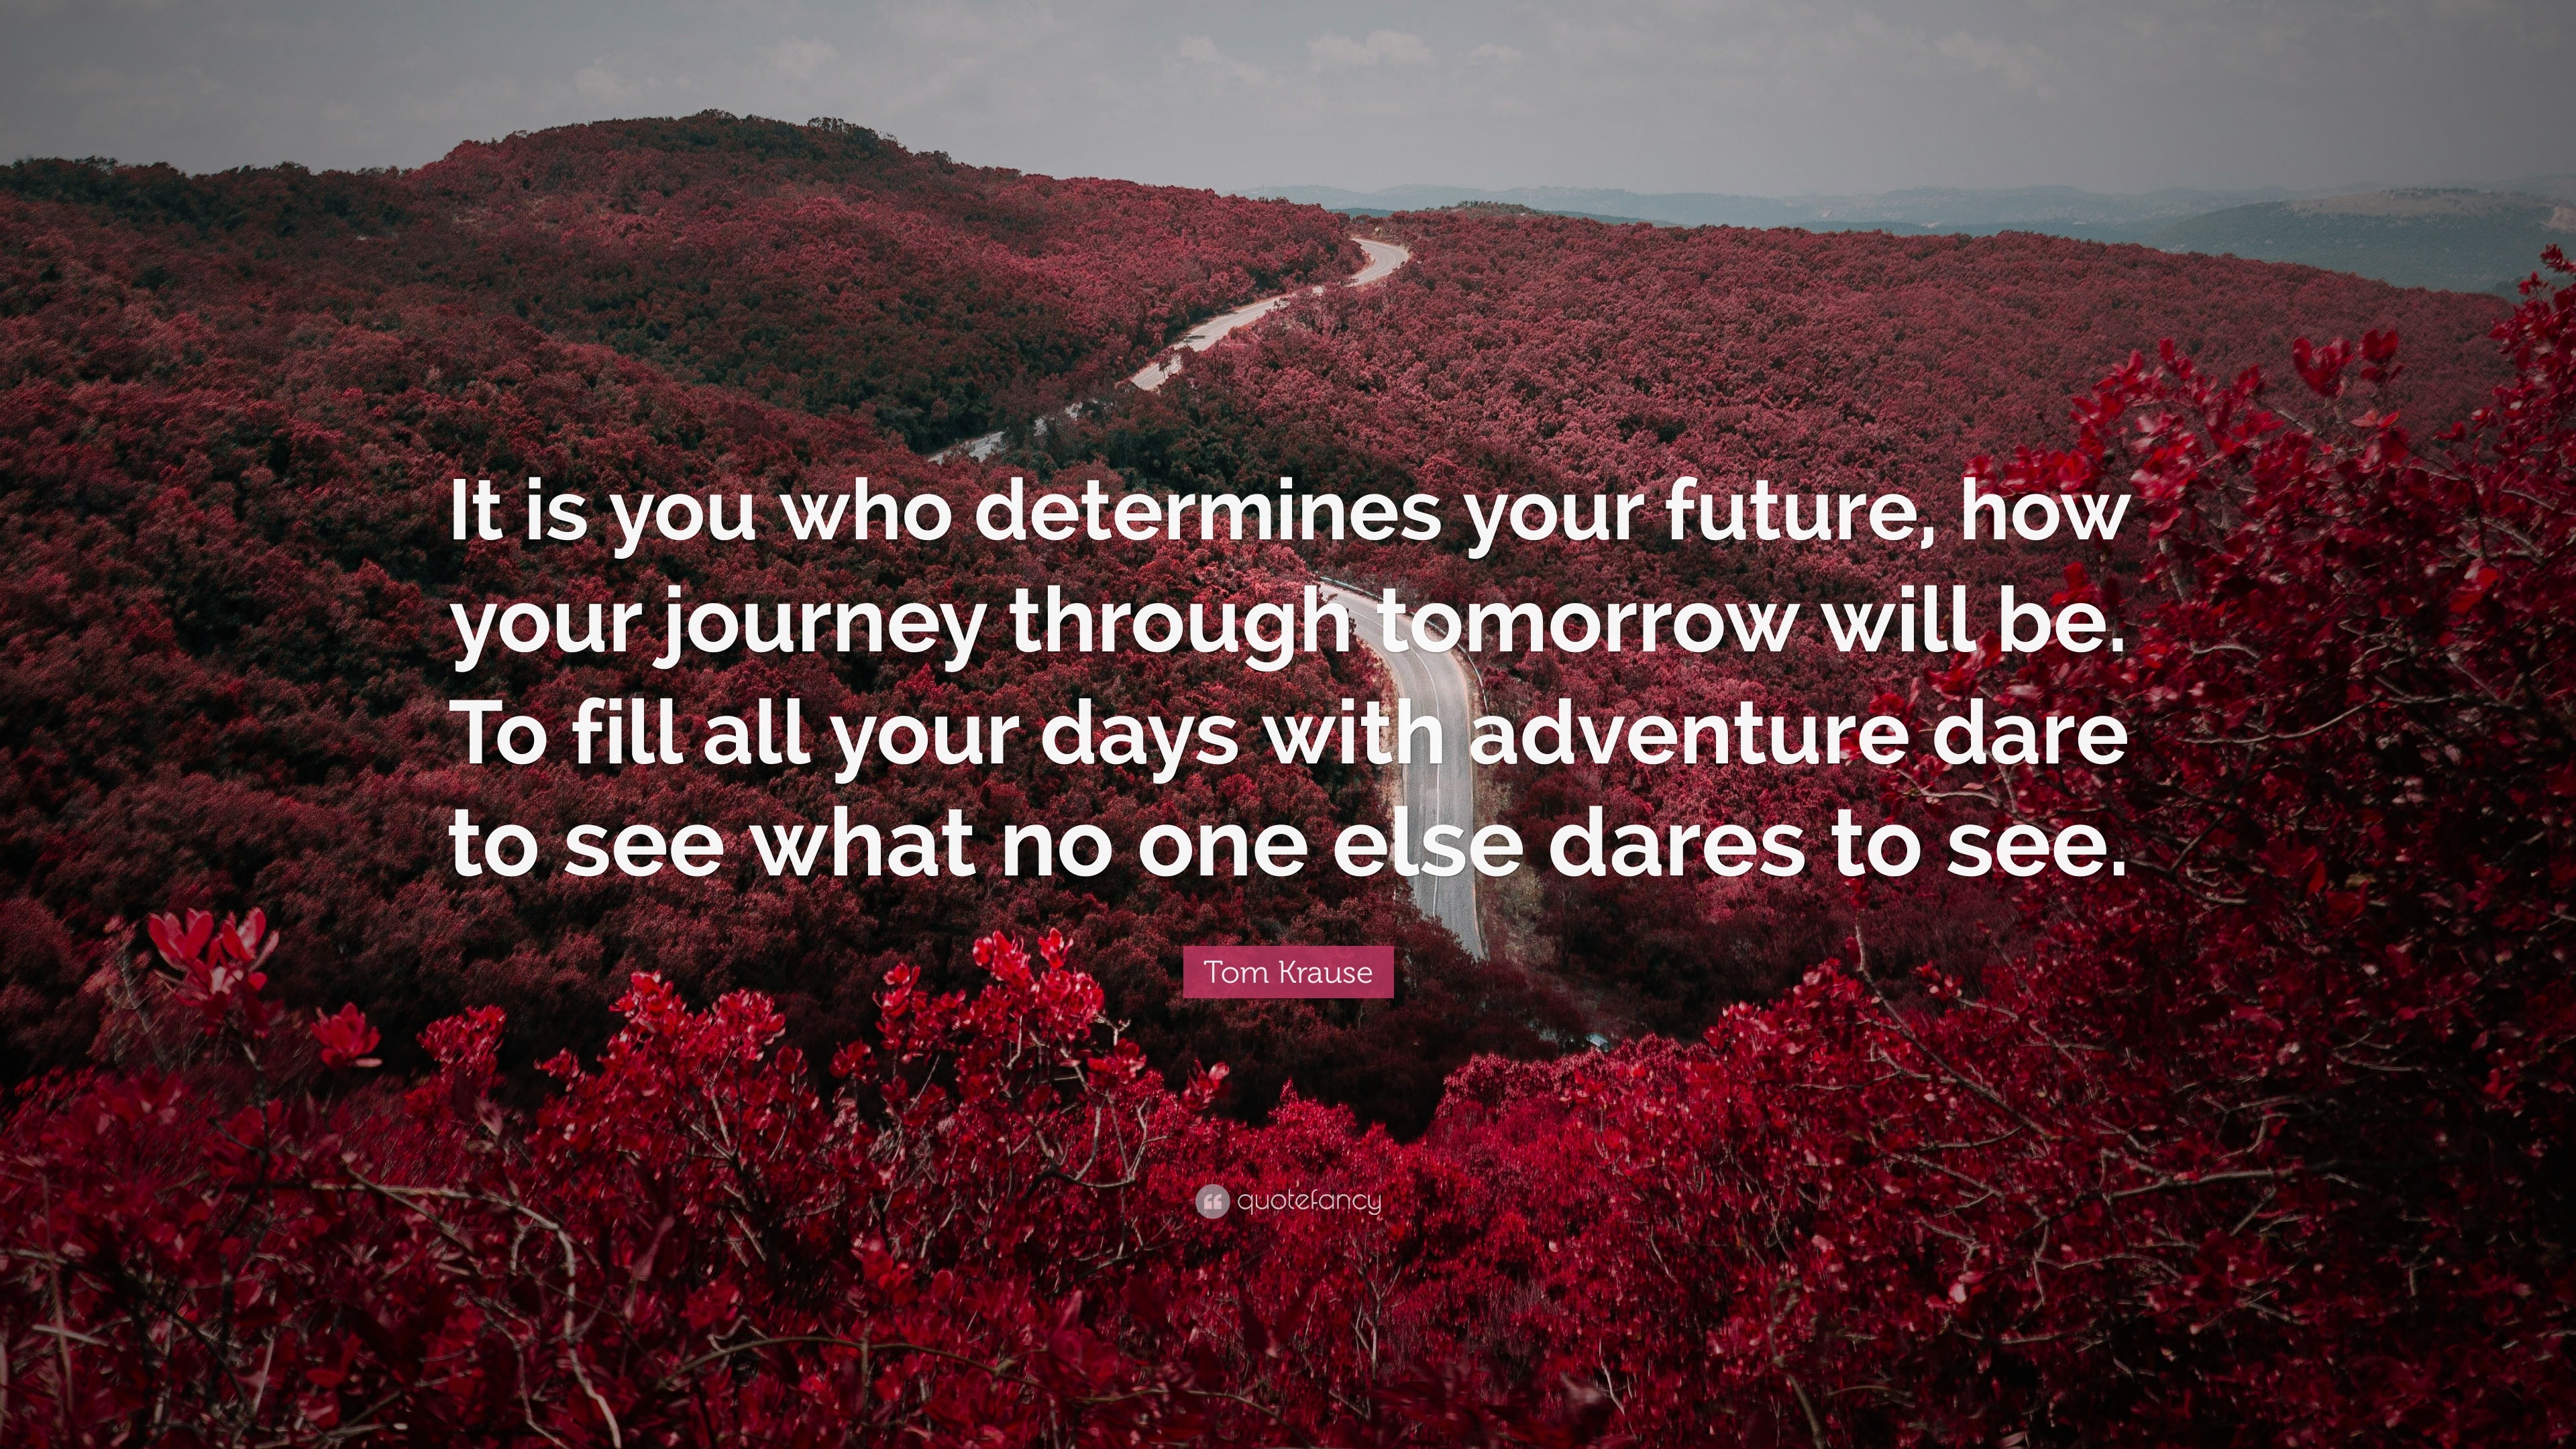 Tom Krause Quote “It is you who determines your future how your journey